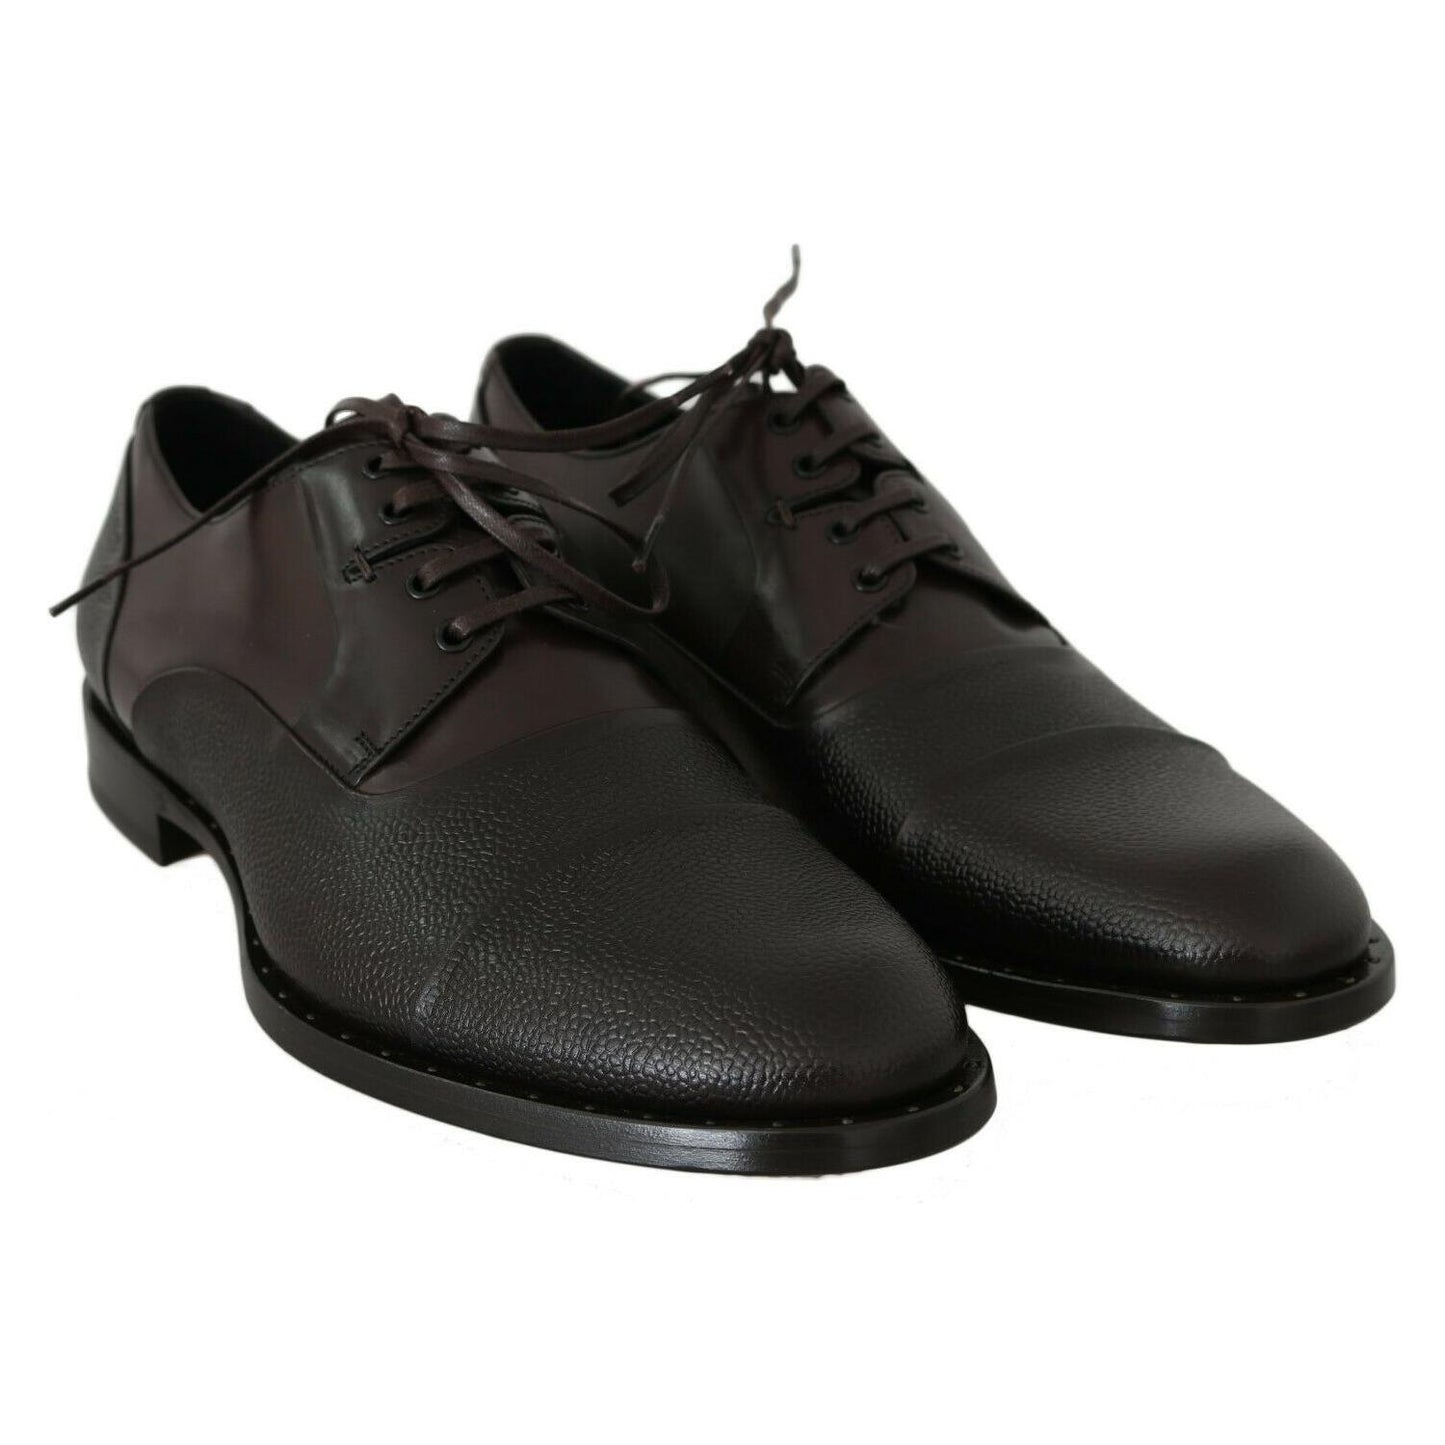 Dolce & Gabbana Elegant Brown Leather Formal Lace-ups brown-leather-laceups-dress-mens-shoes